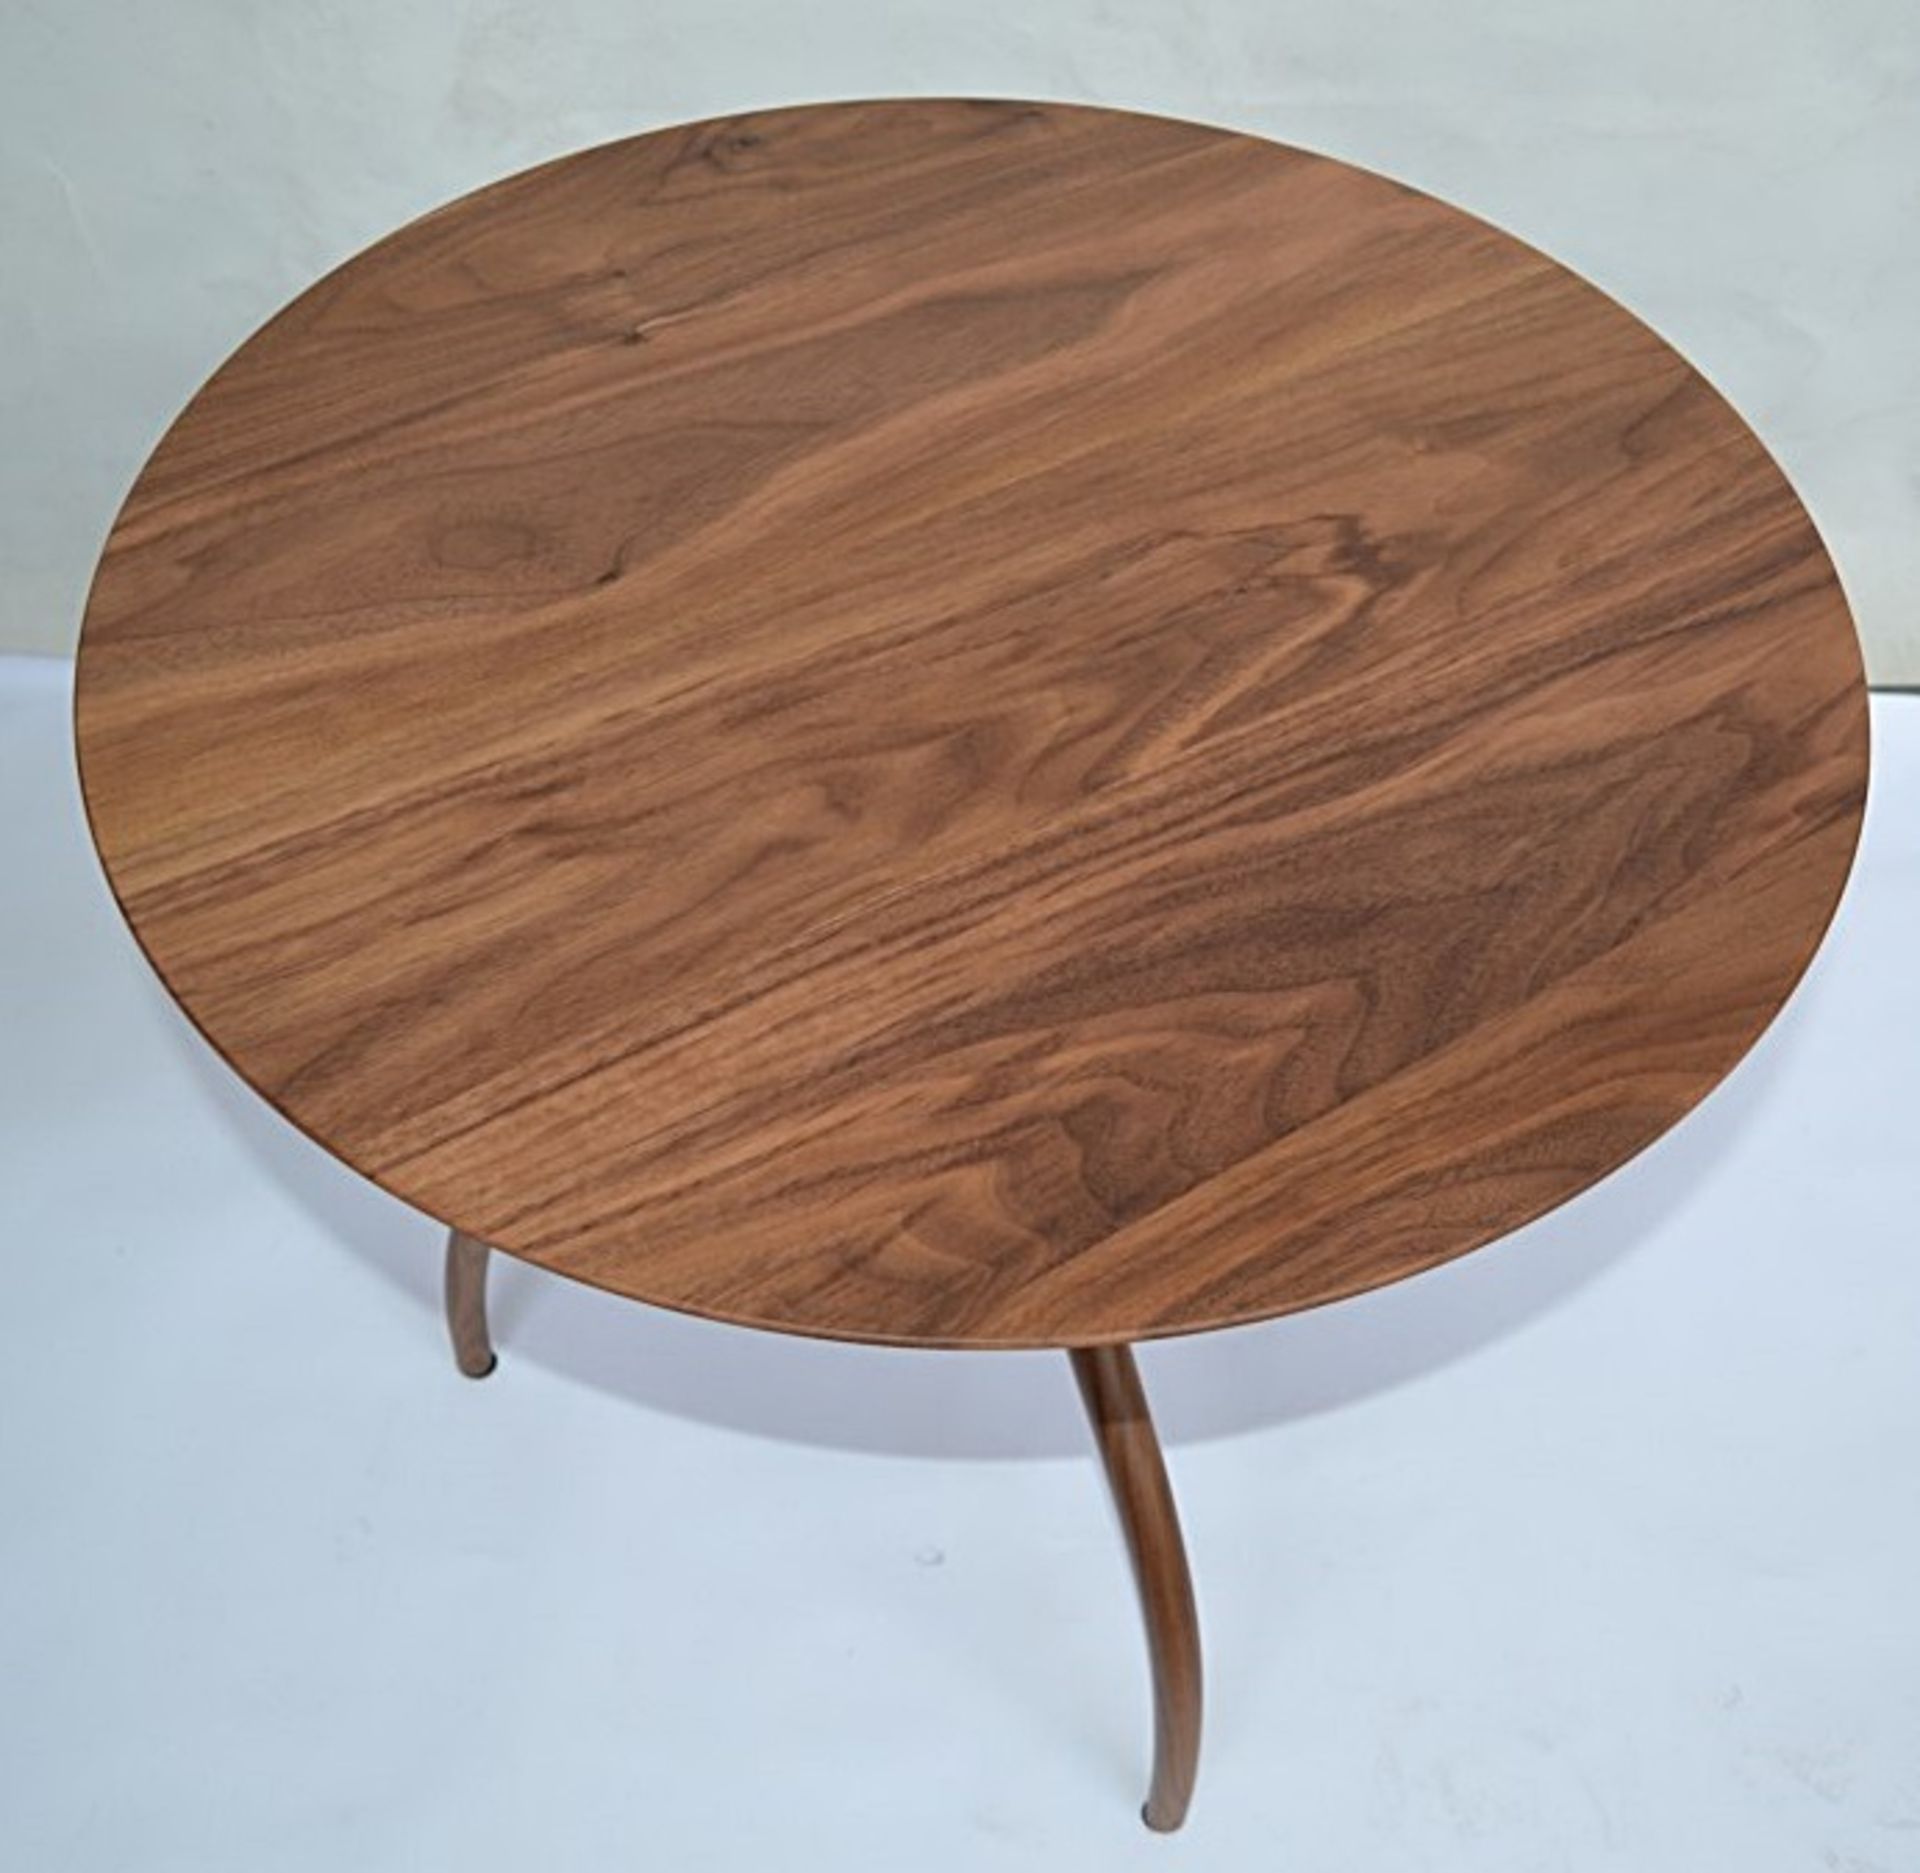 1 x LIGNE ROSET Occasional Table In Walnut - Designed By Pierre Paulin - Dimensions: H50 x Diameter: - Image 3 of 7